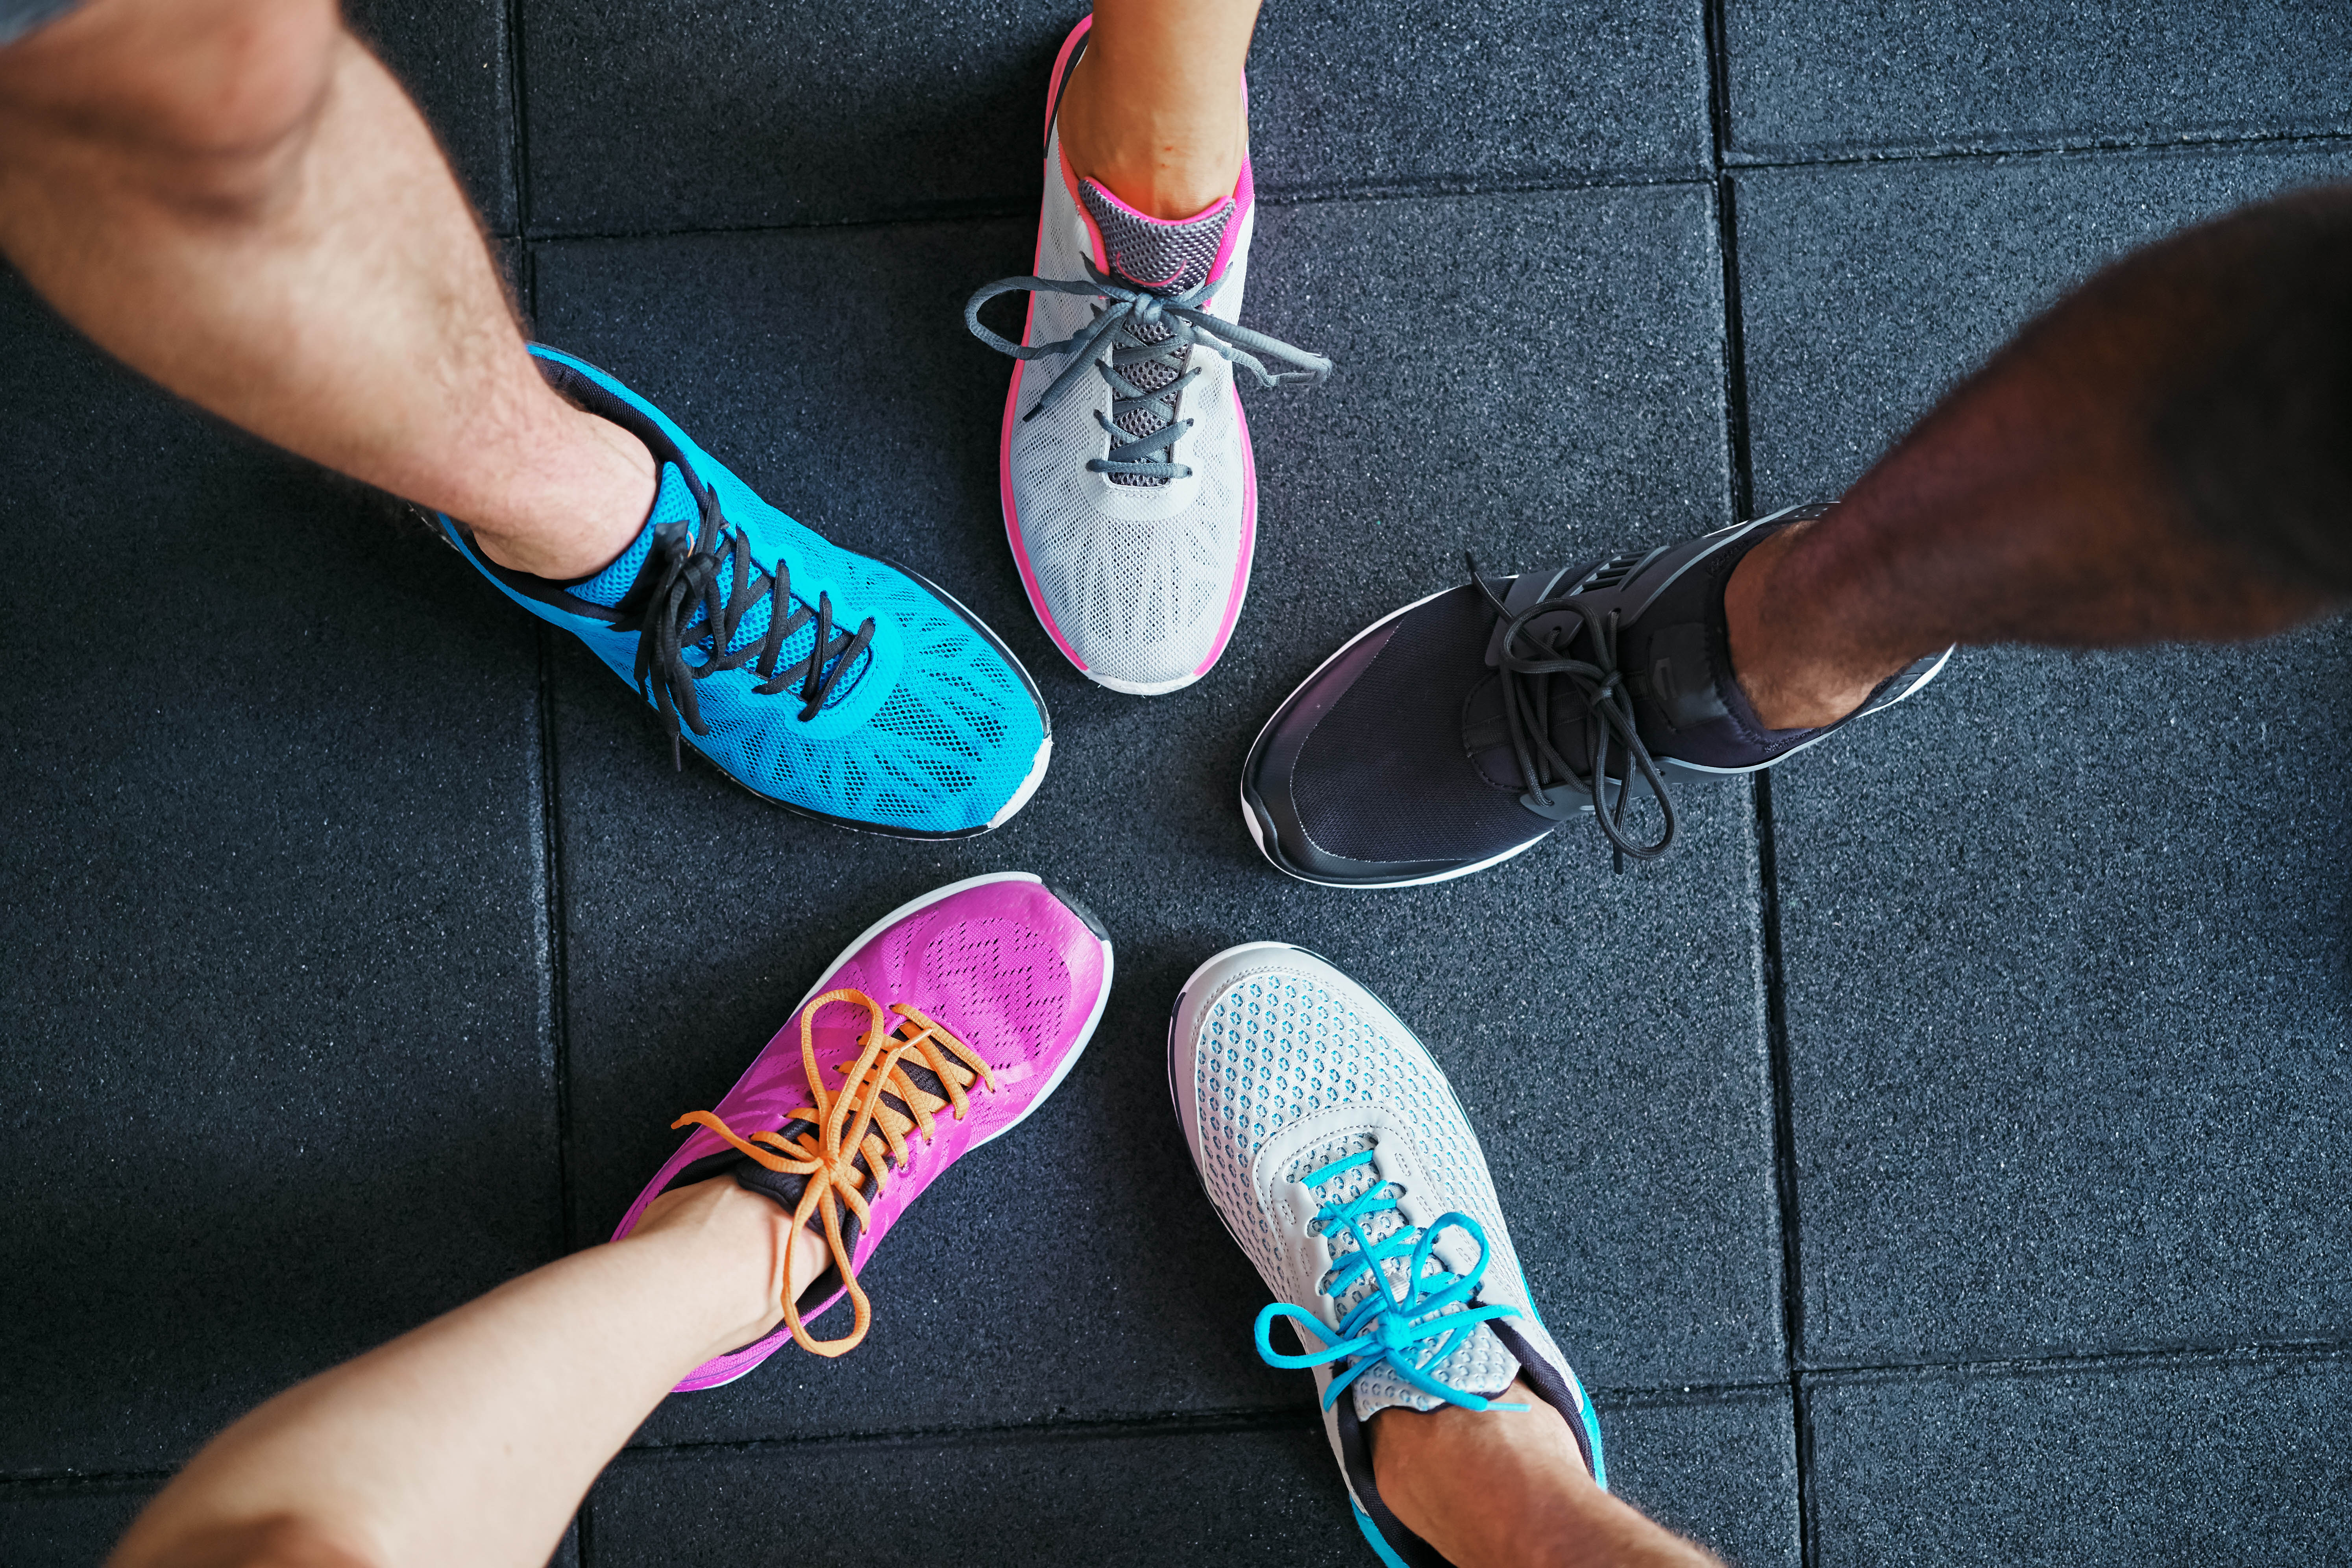 Five people wearing running shoes in the gym with their feet together in a circle